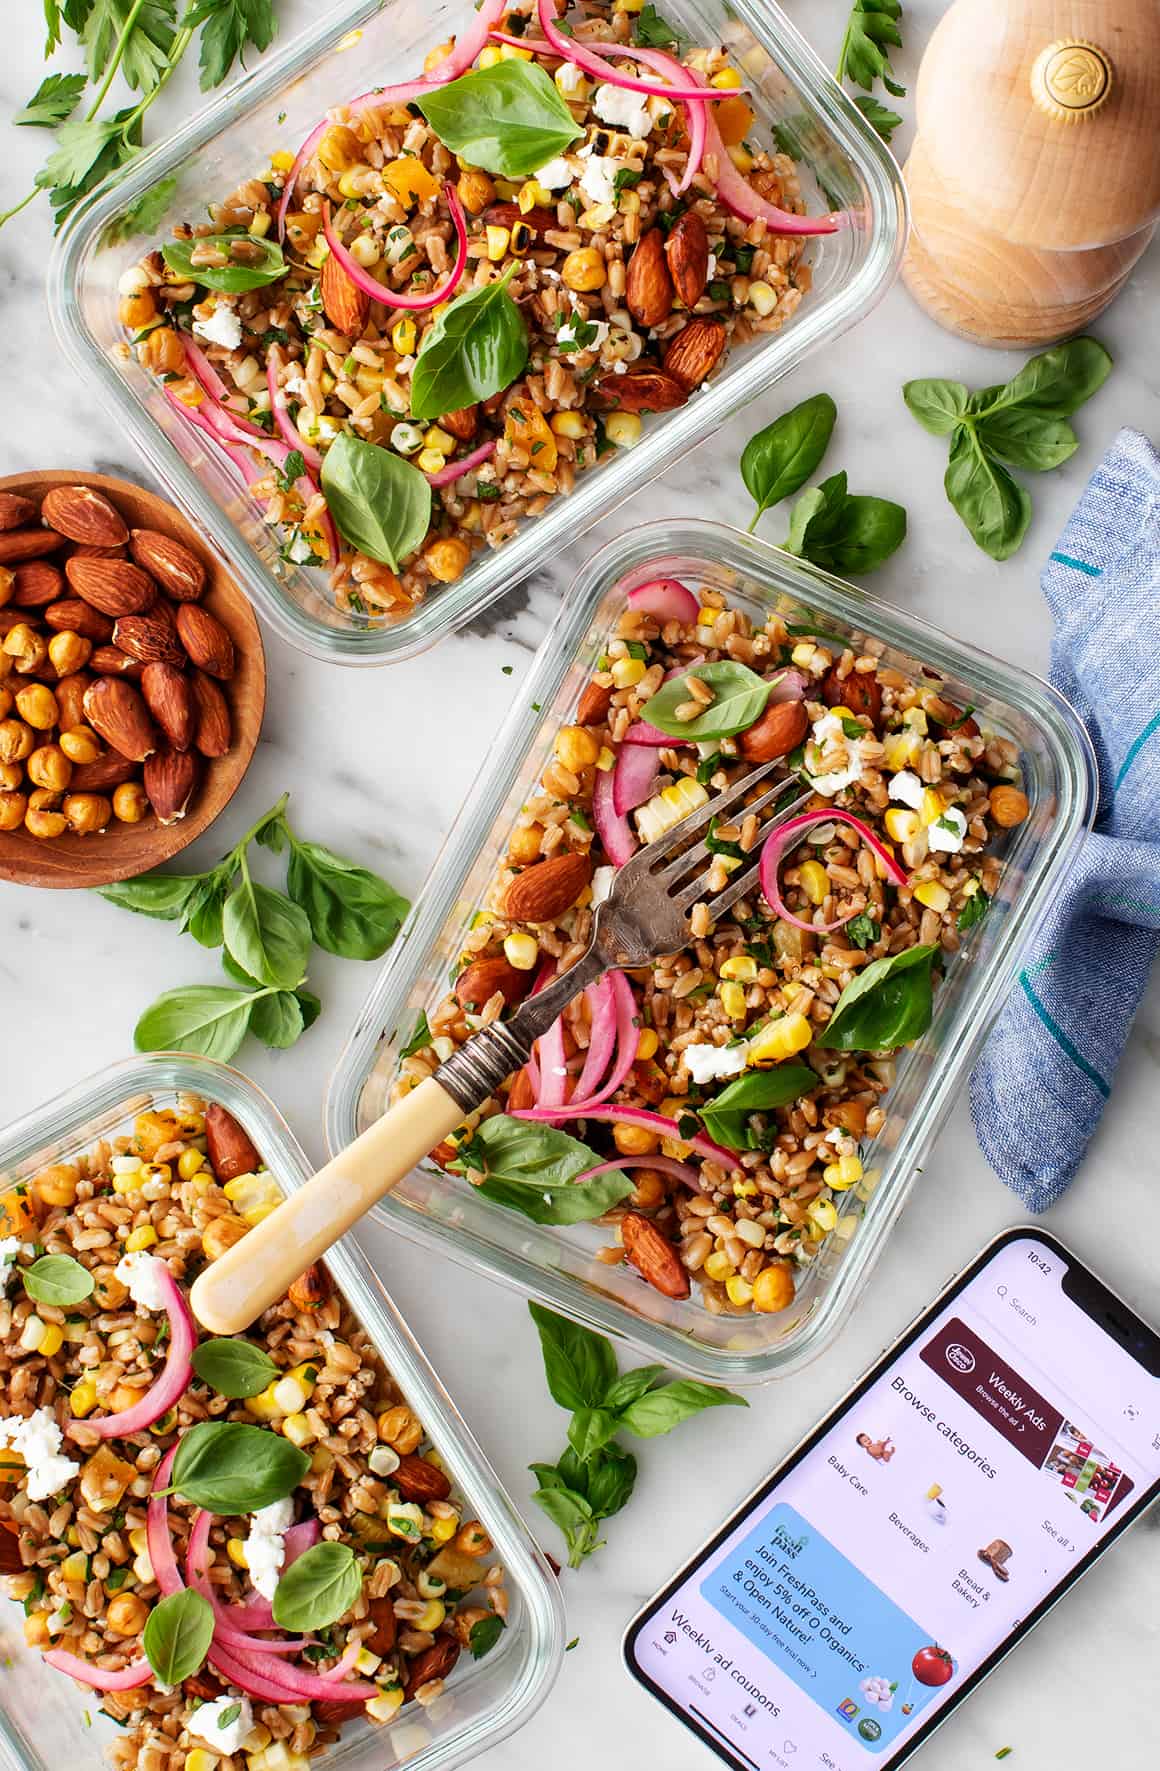 Grain salad in meal prep containers